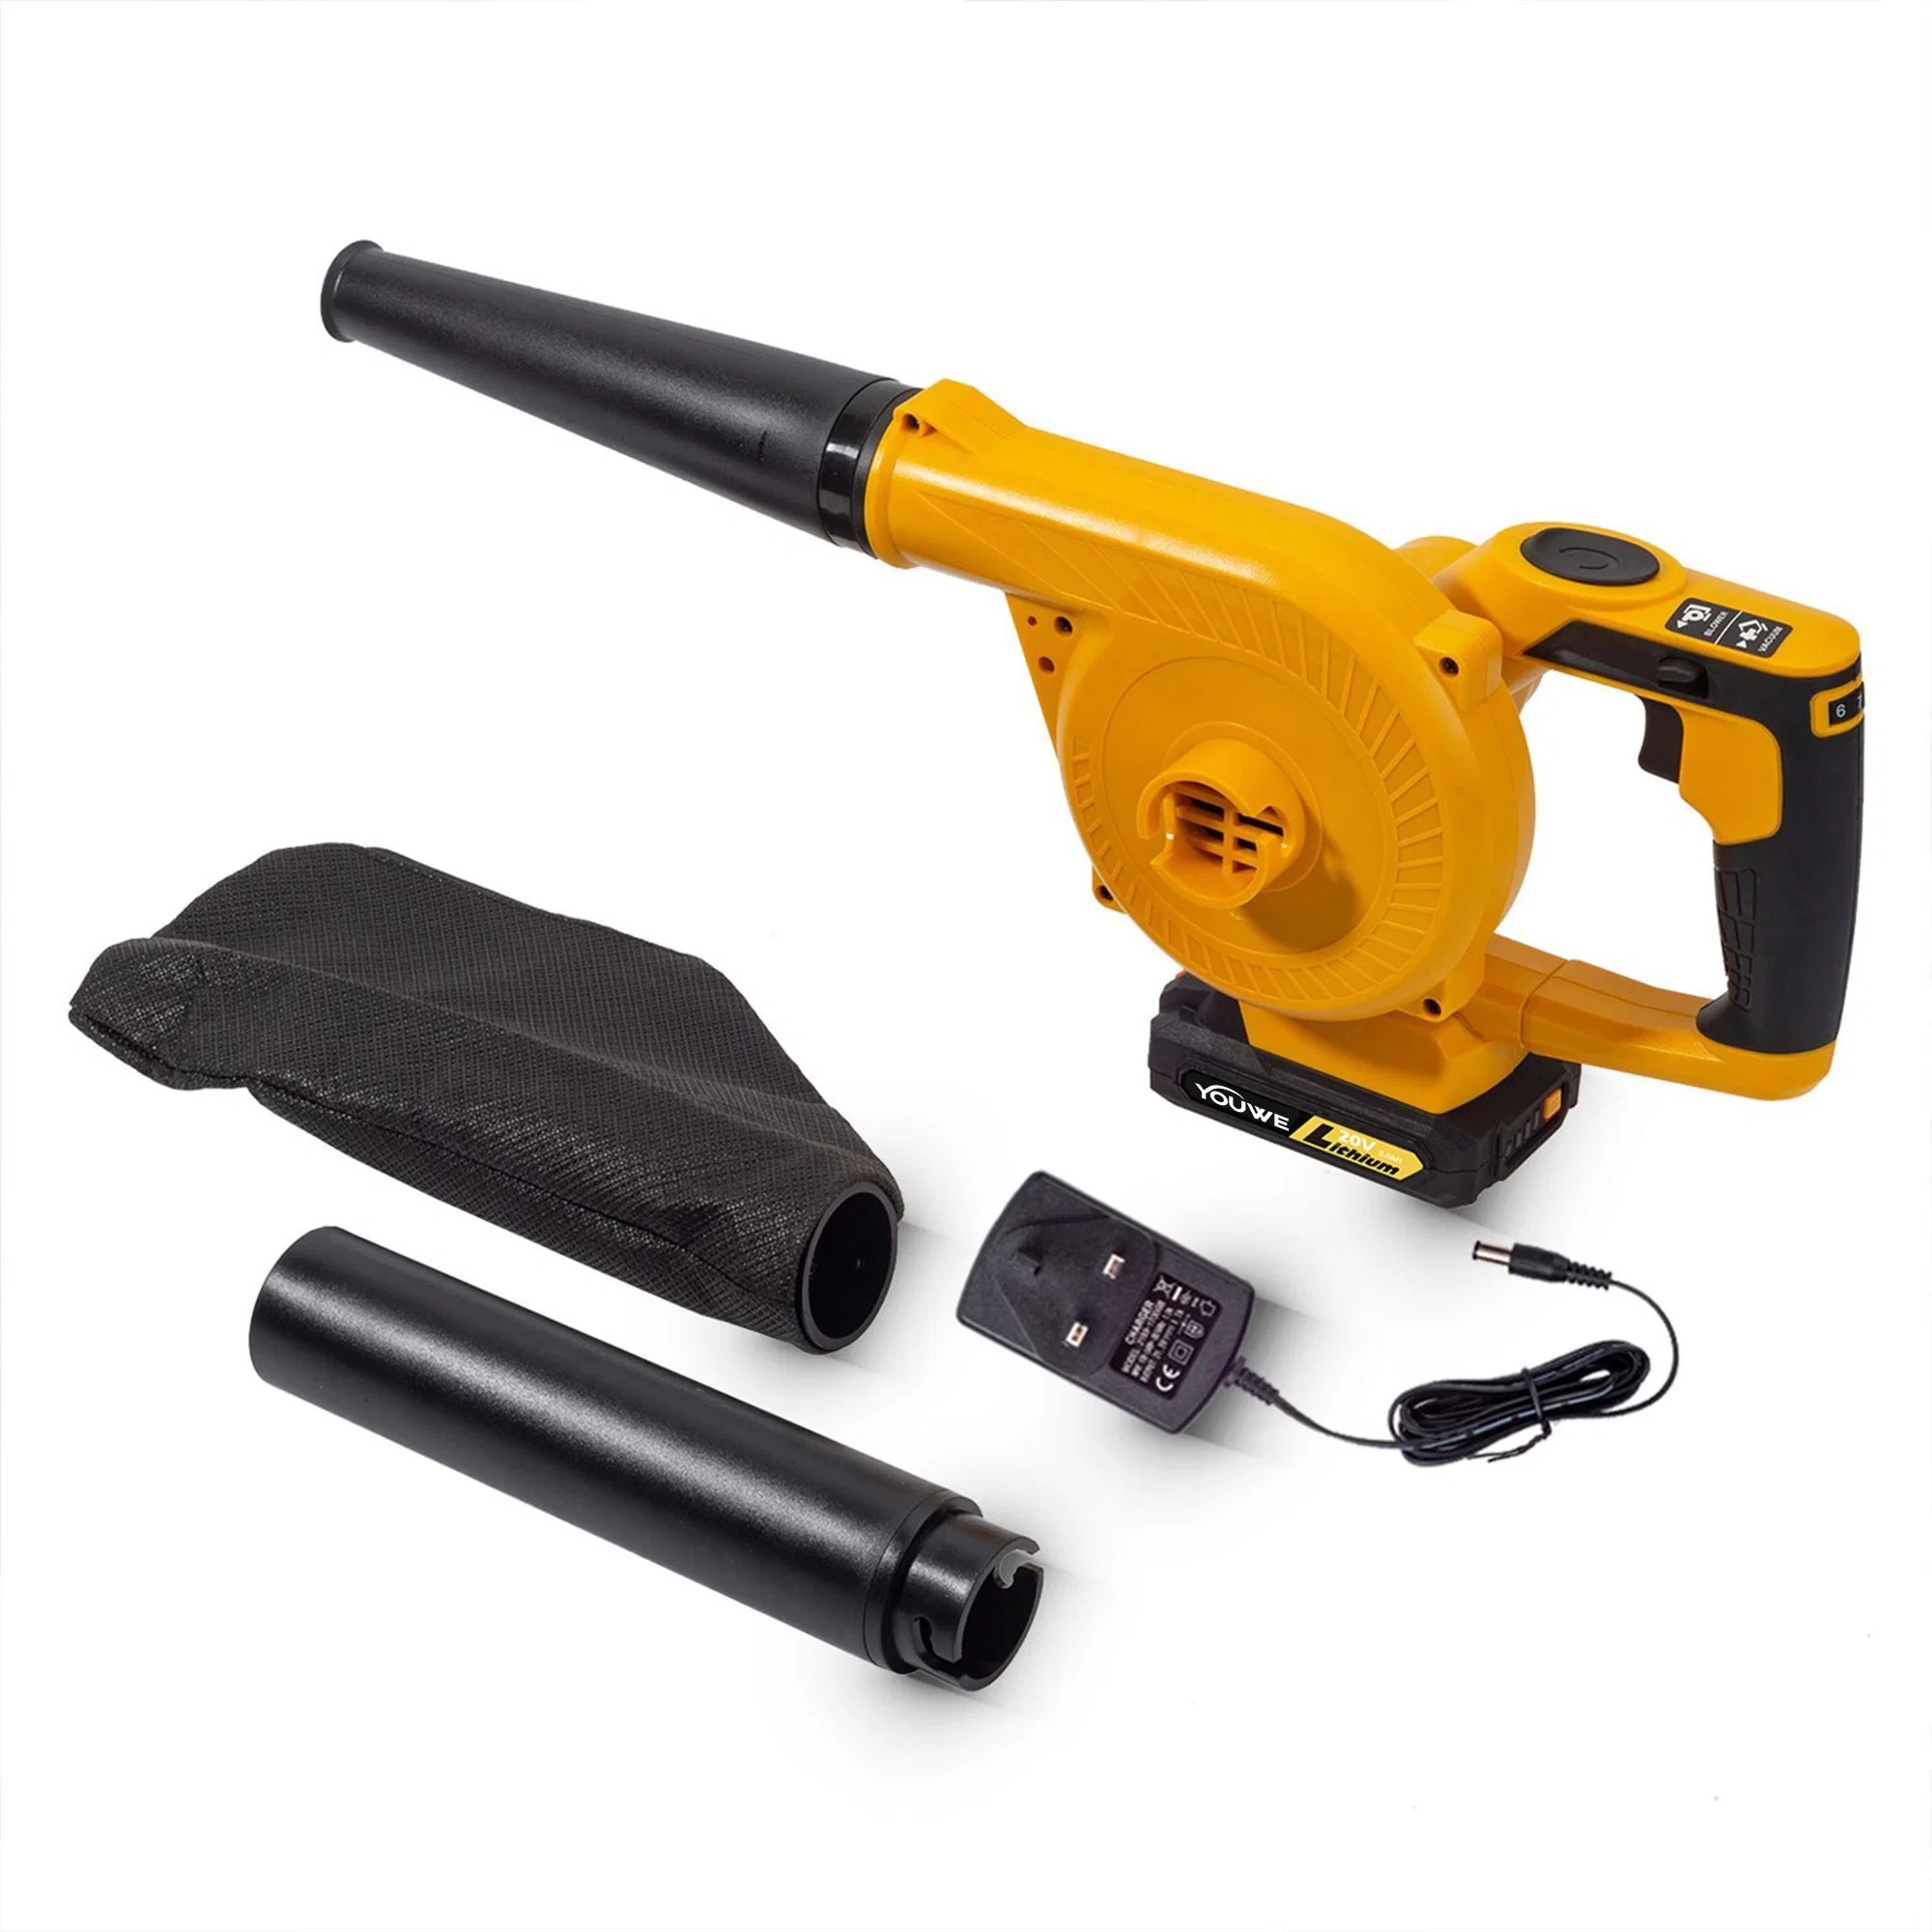 20V Garden Cordless Blower Vacuum Clean Air Blower for Dust Blowing Dust